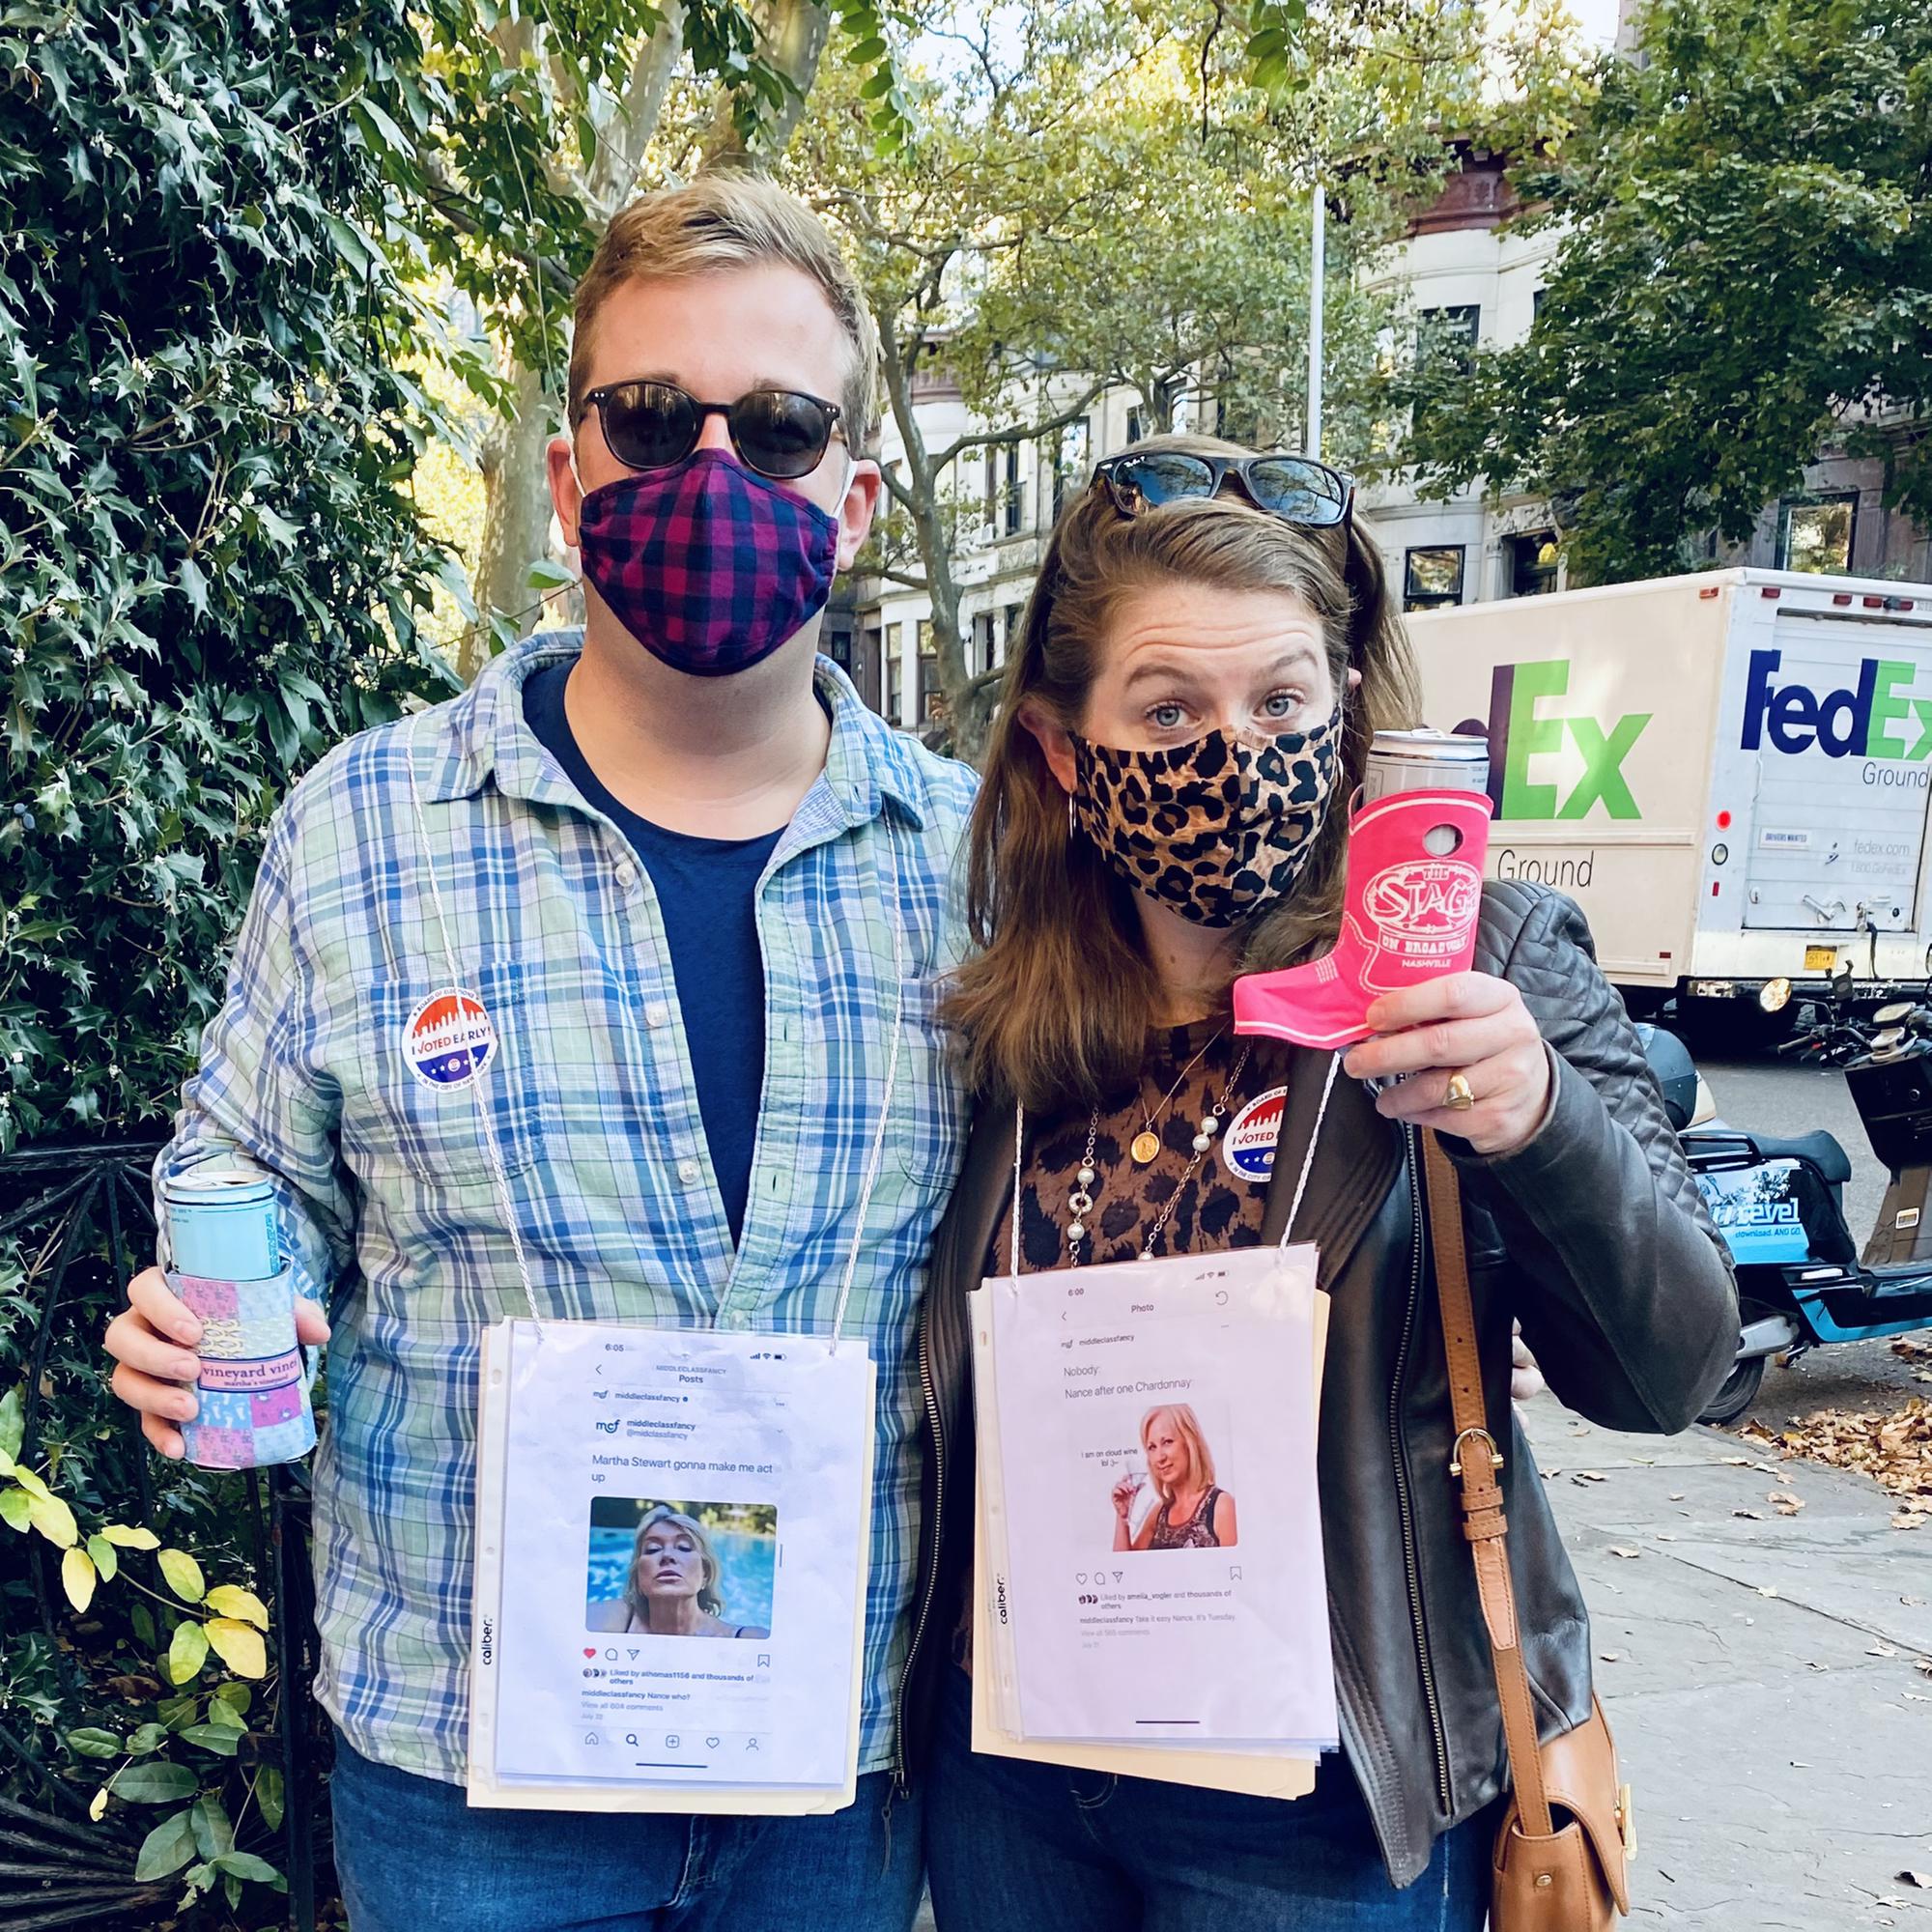 First halloween costumes:  Middle Class Fancy meme account.  October 2020.